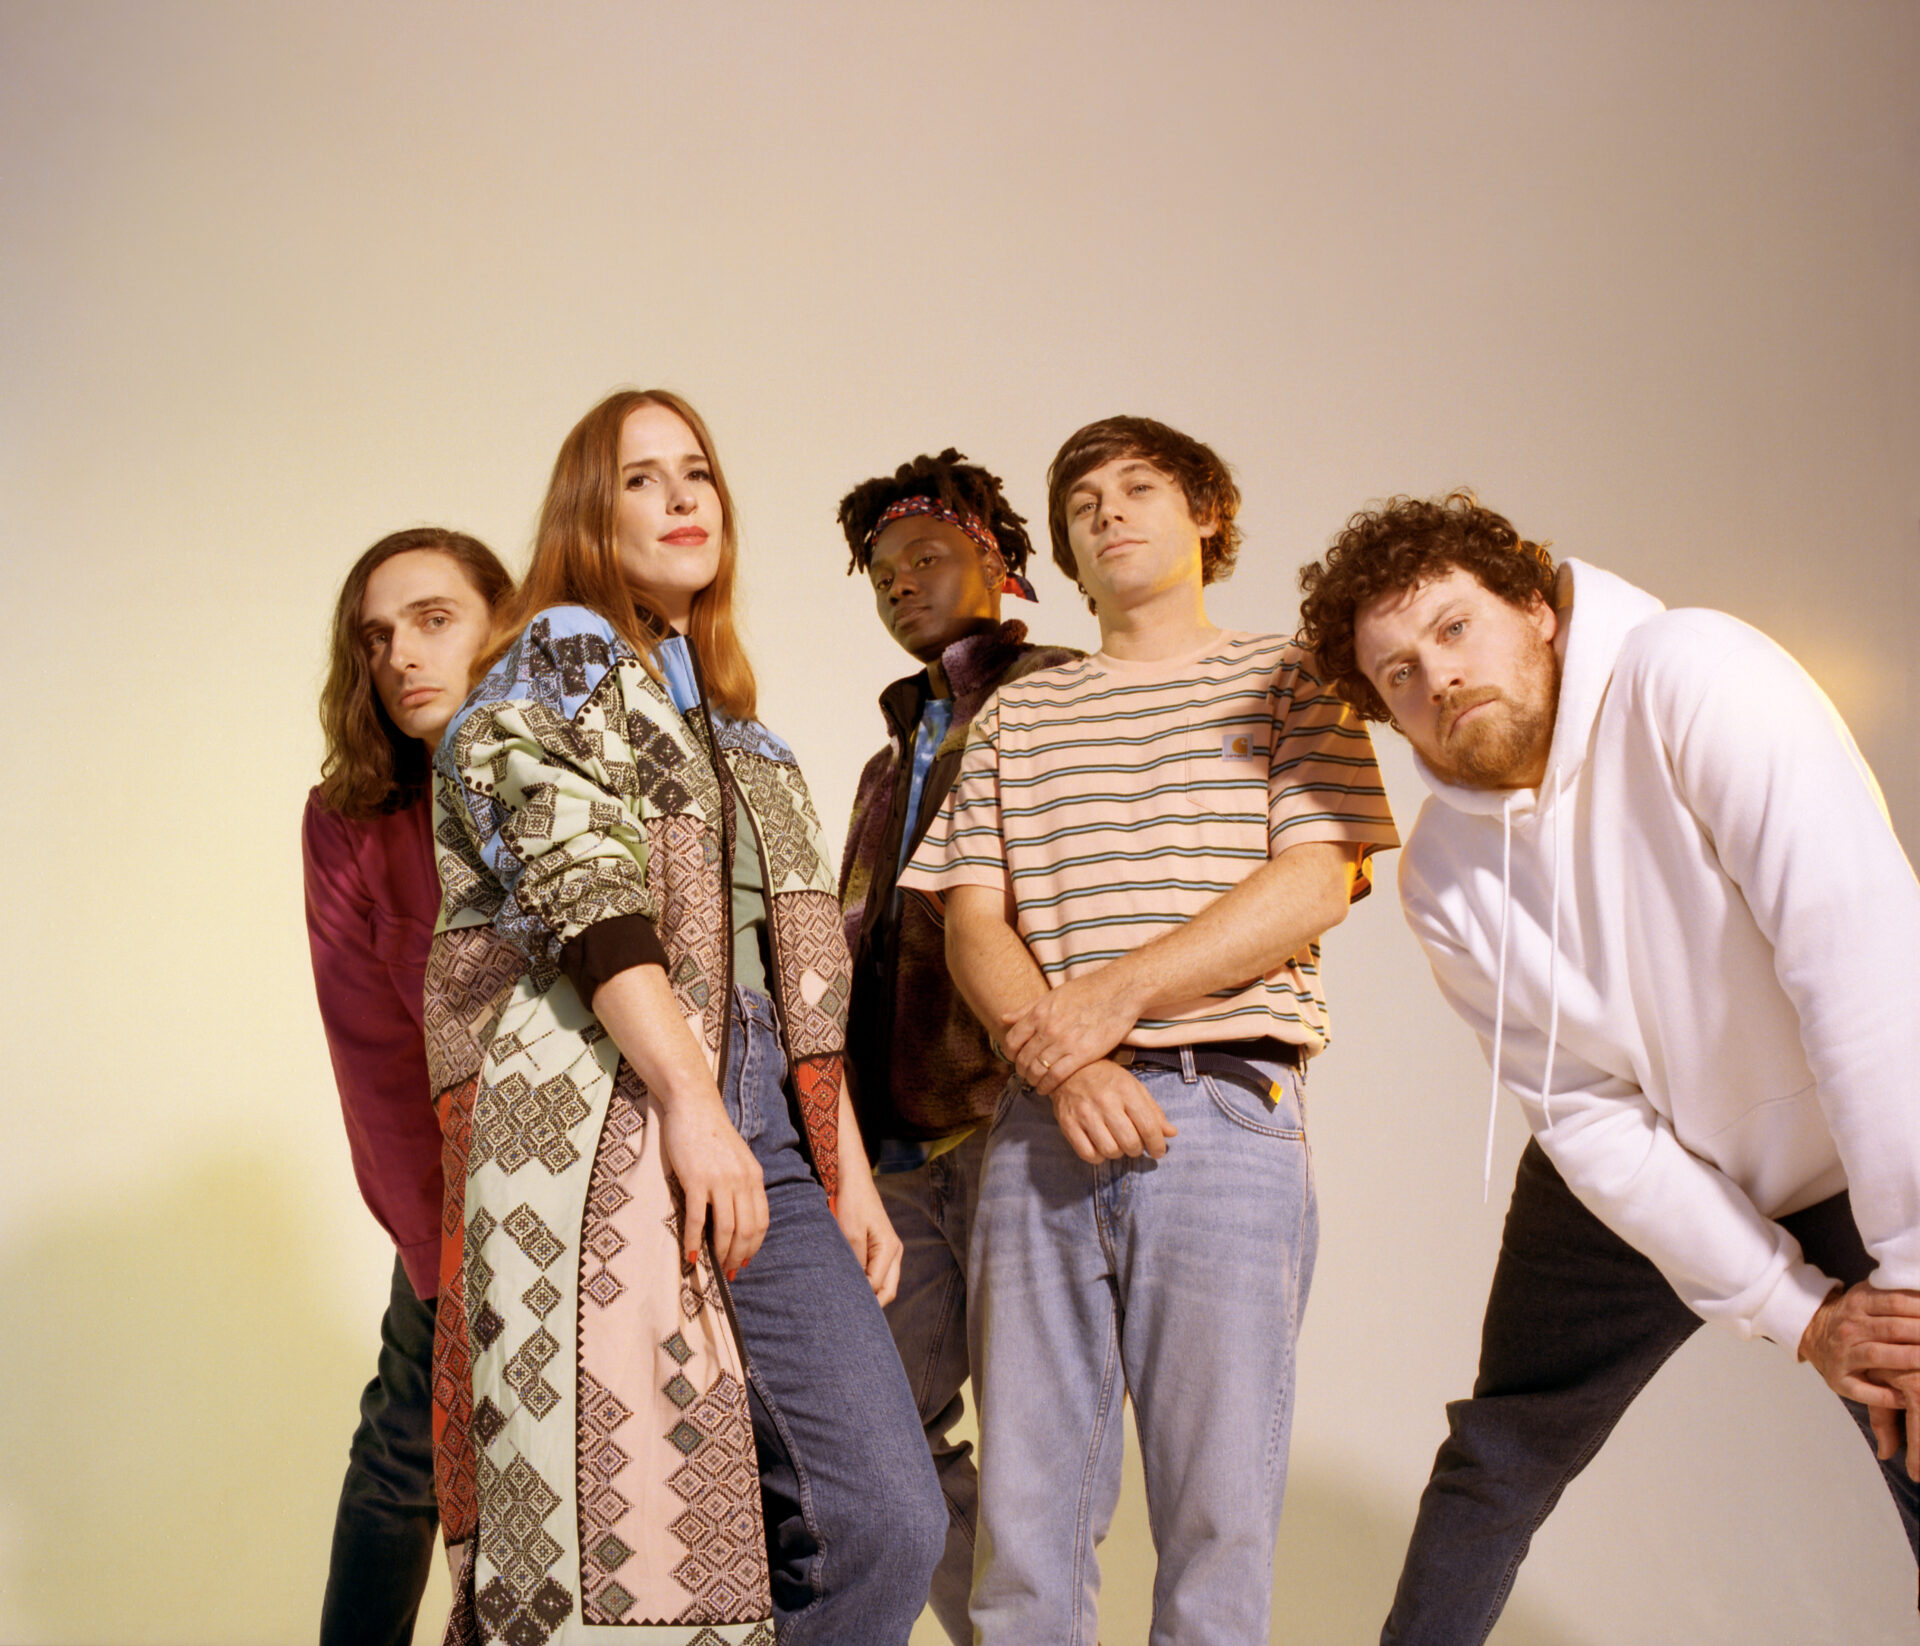 NEWS: Metronomy release surprise 'Posse EP, Vol One' feat Sorry, Biig Pinty, Folly Group & 2022 Dates